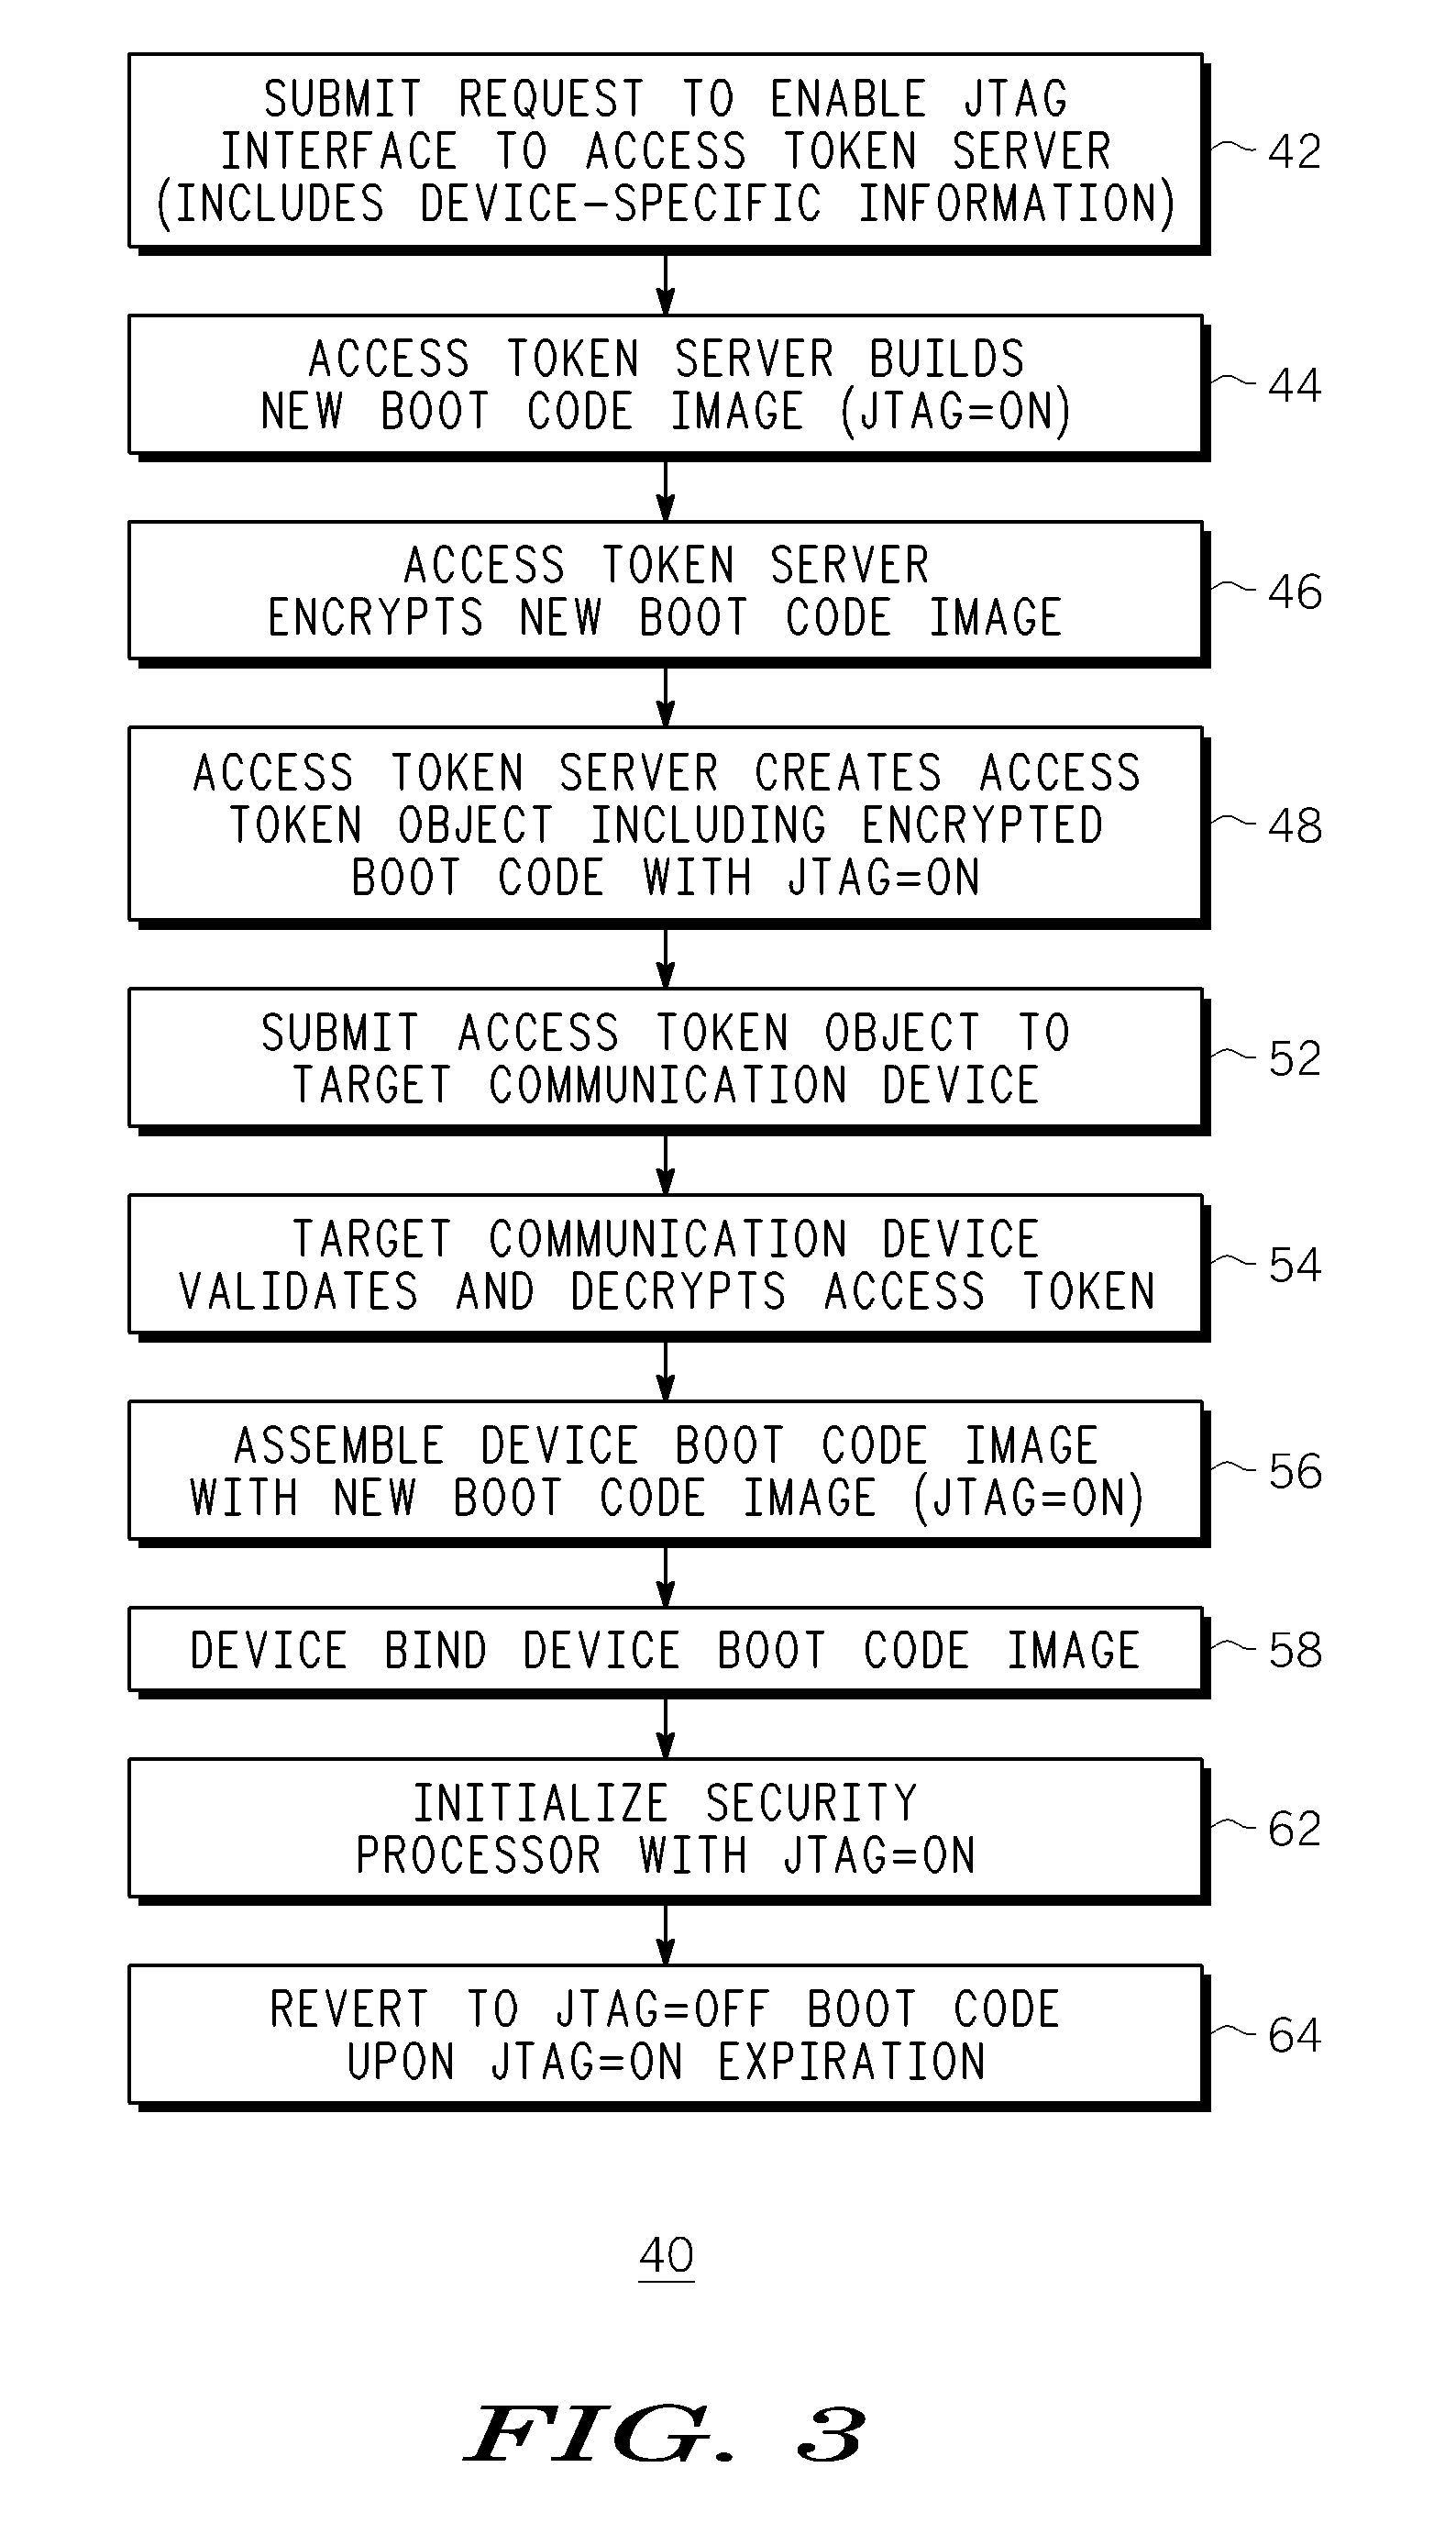 Method and apparatus for controlling enablement of jtag interface